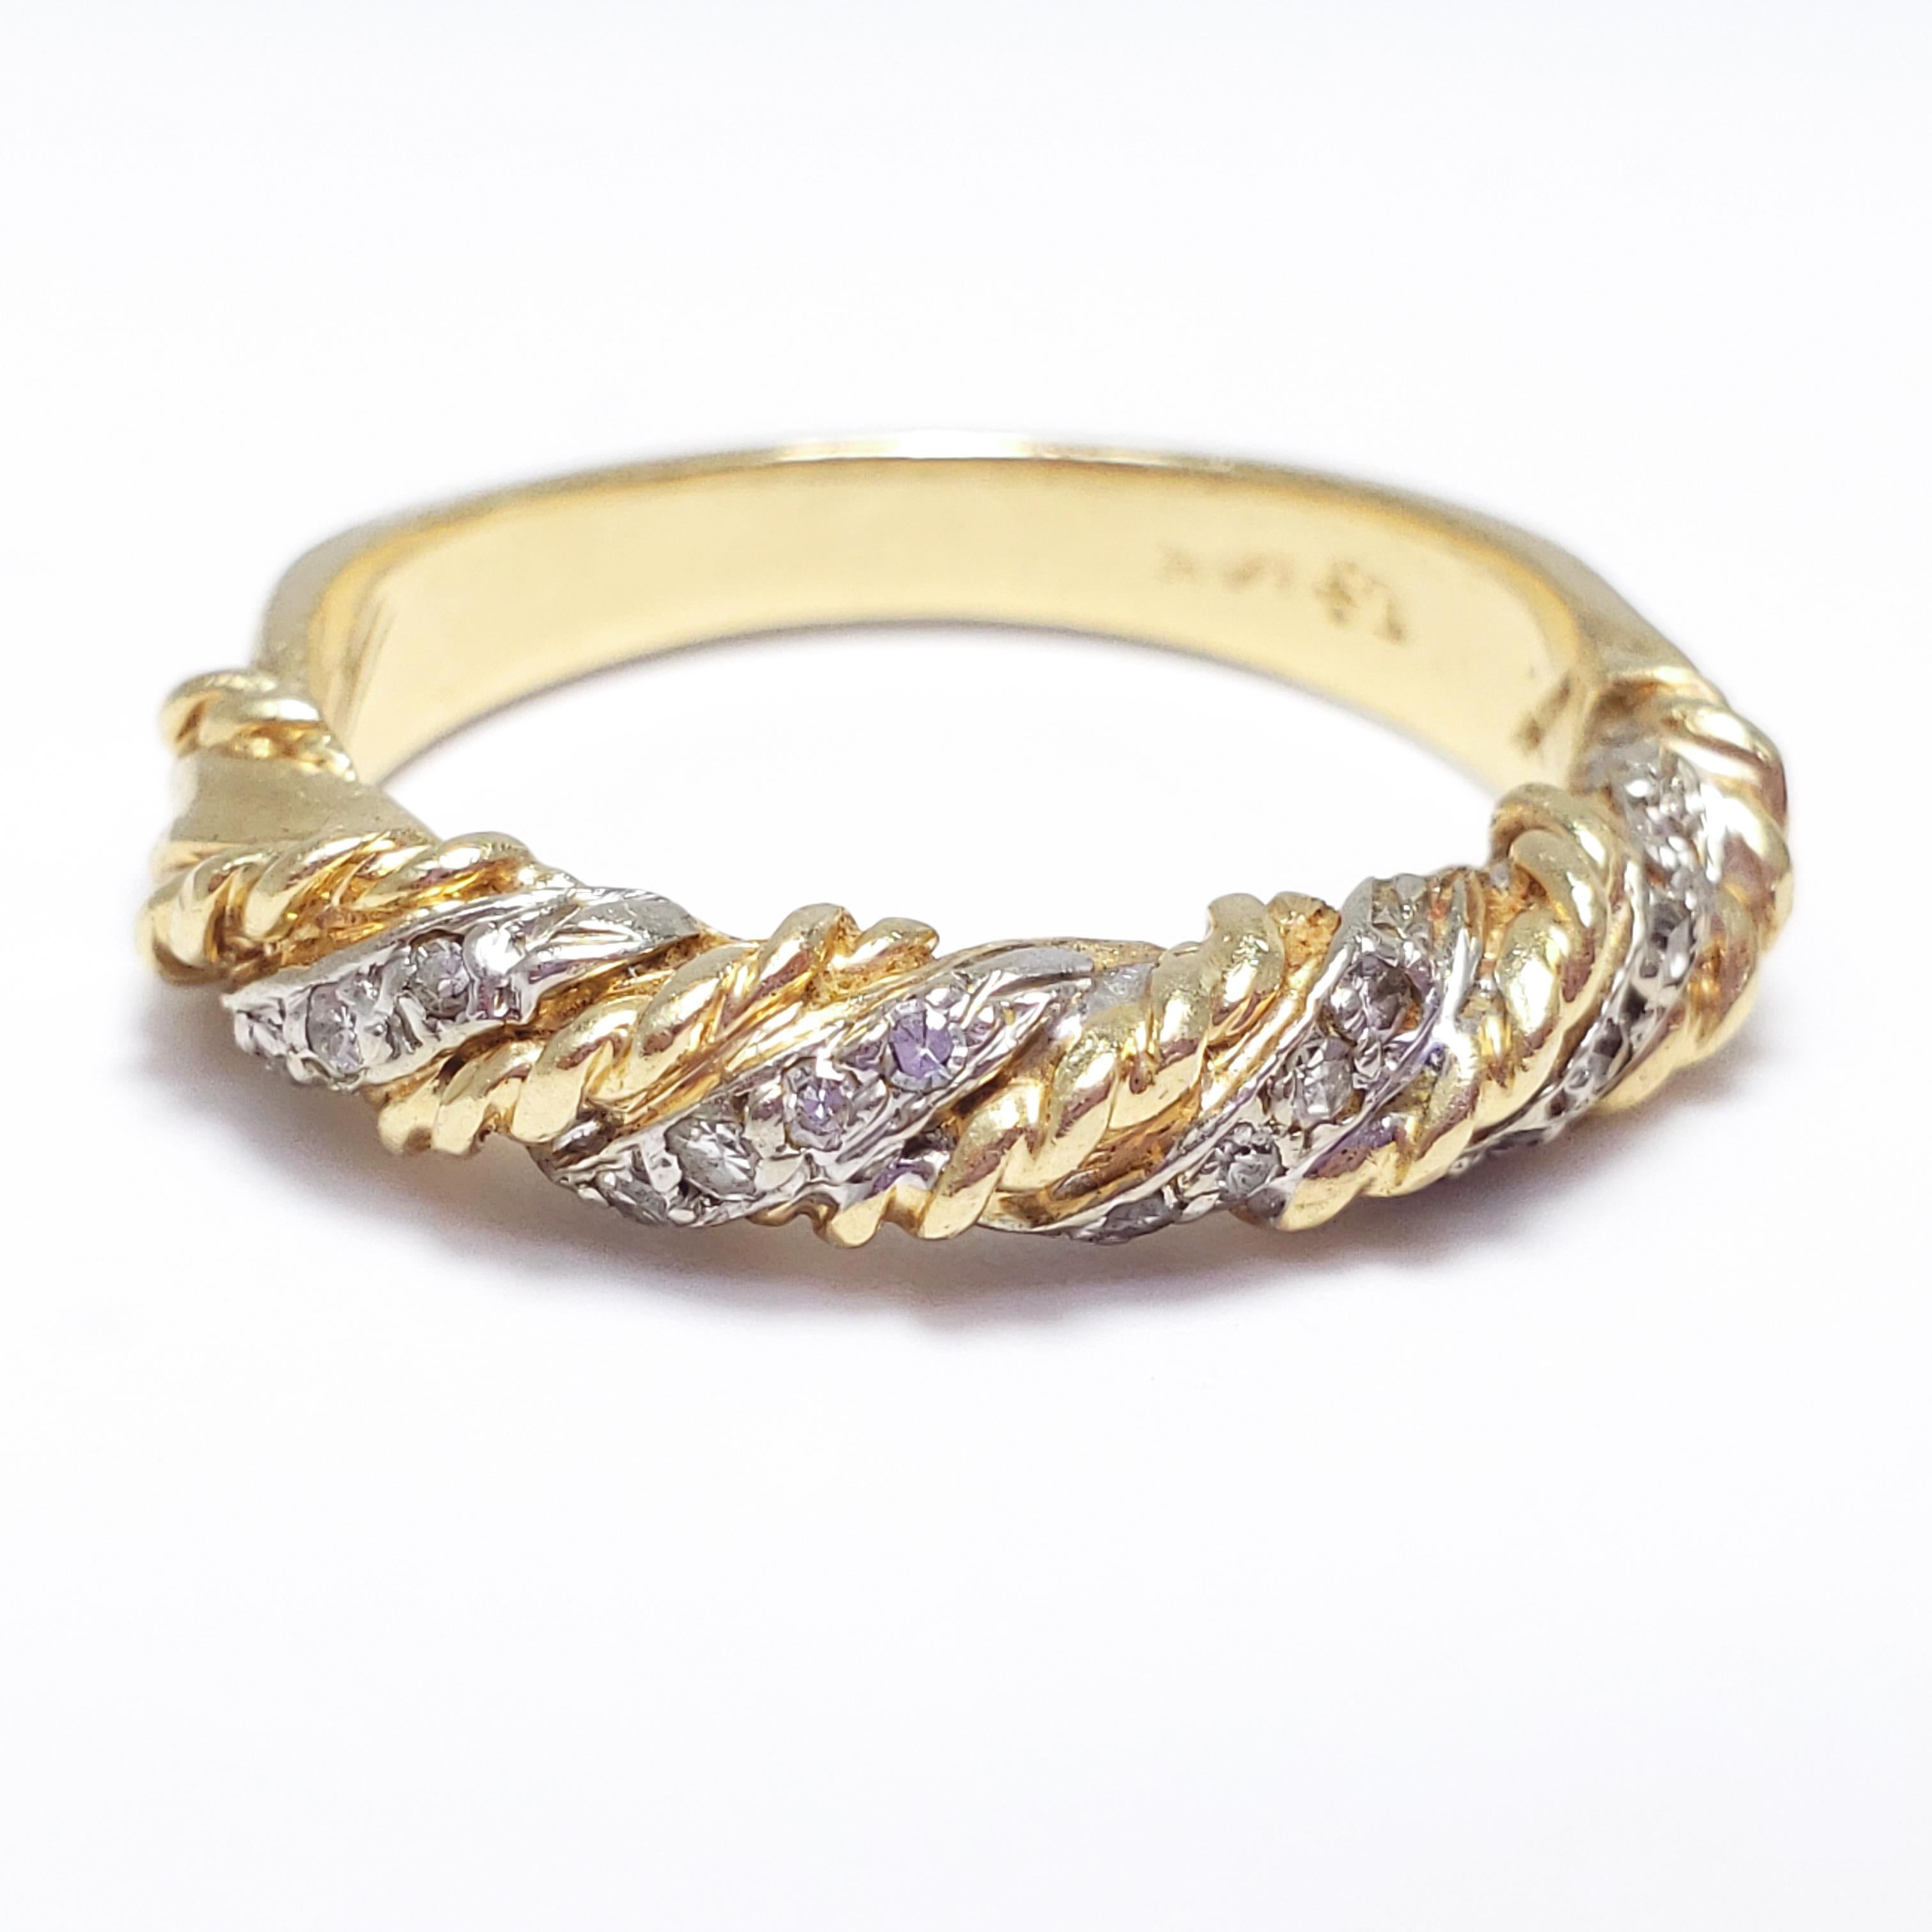 A fancy ring featuring intertwined 14K gold and platinum on the front. Each of the 4 platinum rows is accented with 4 .01 carat diamonds, for a total of 16 diamonds totaling .16 carats. Hallmarked 14K and 